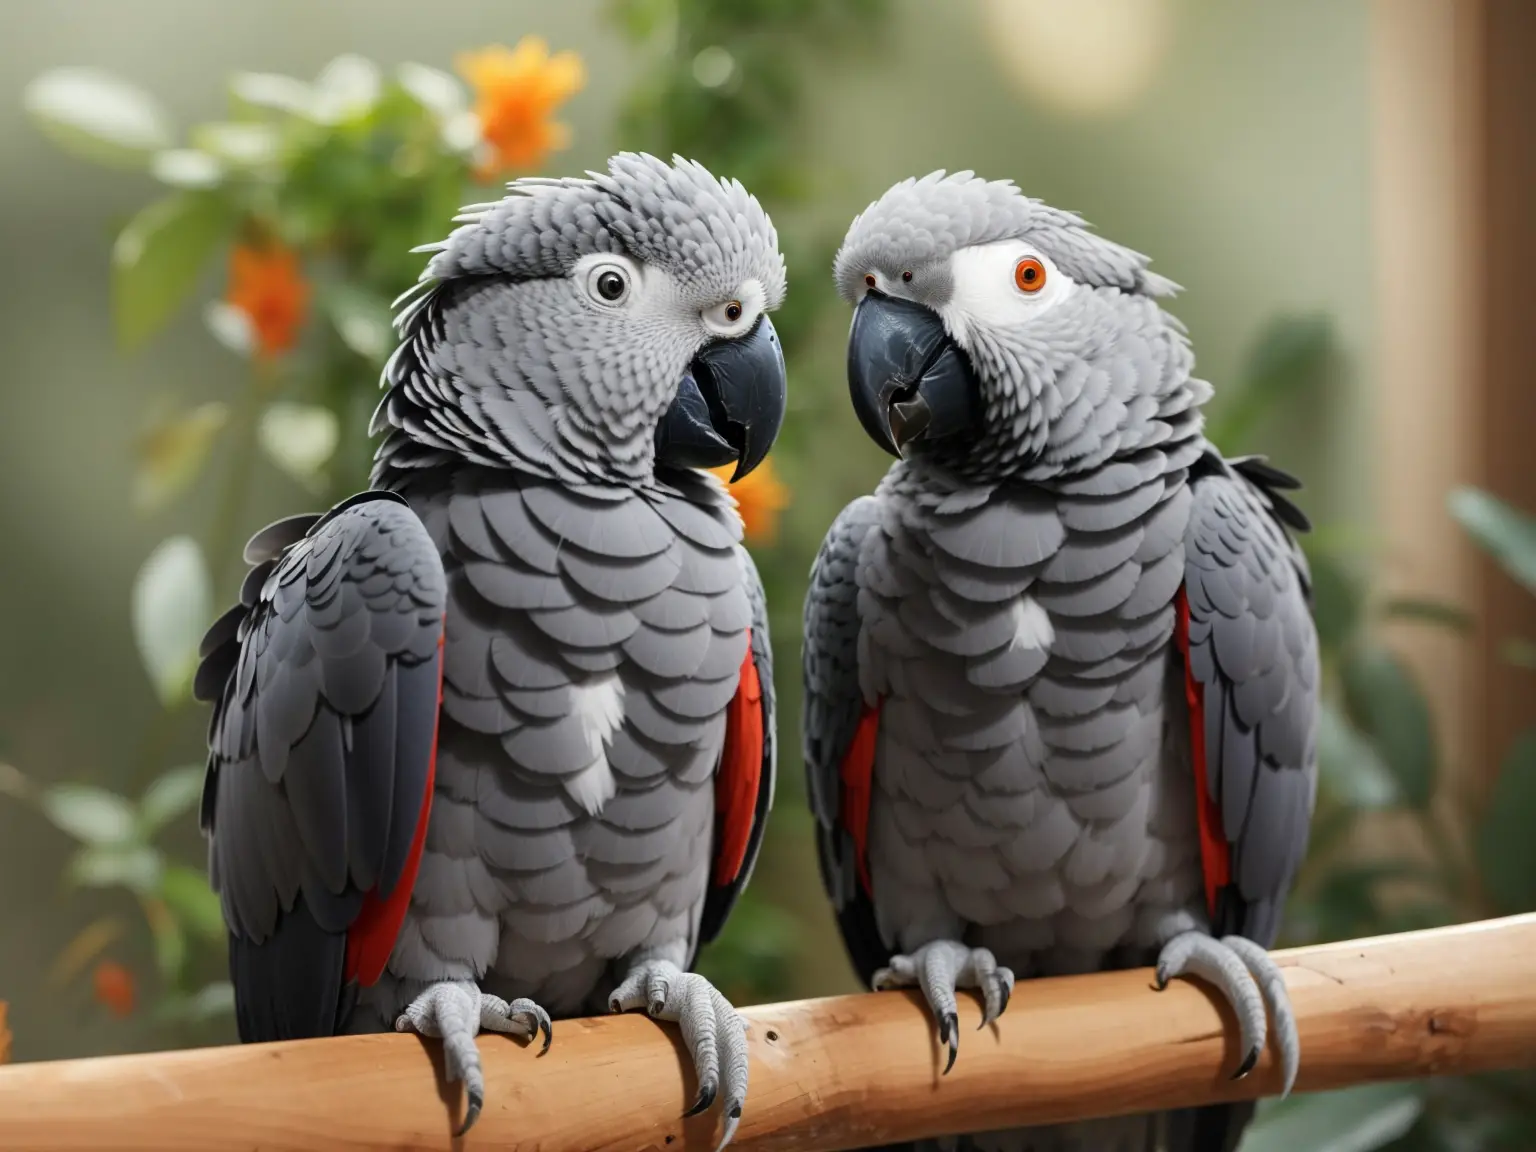 No, onions are toxic for African Grey Parrots.